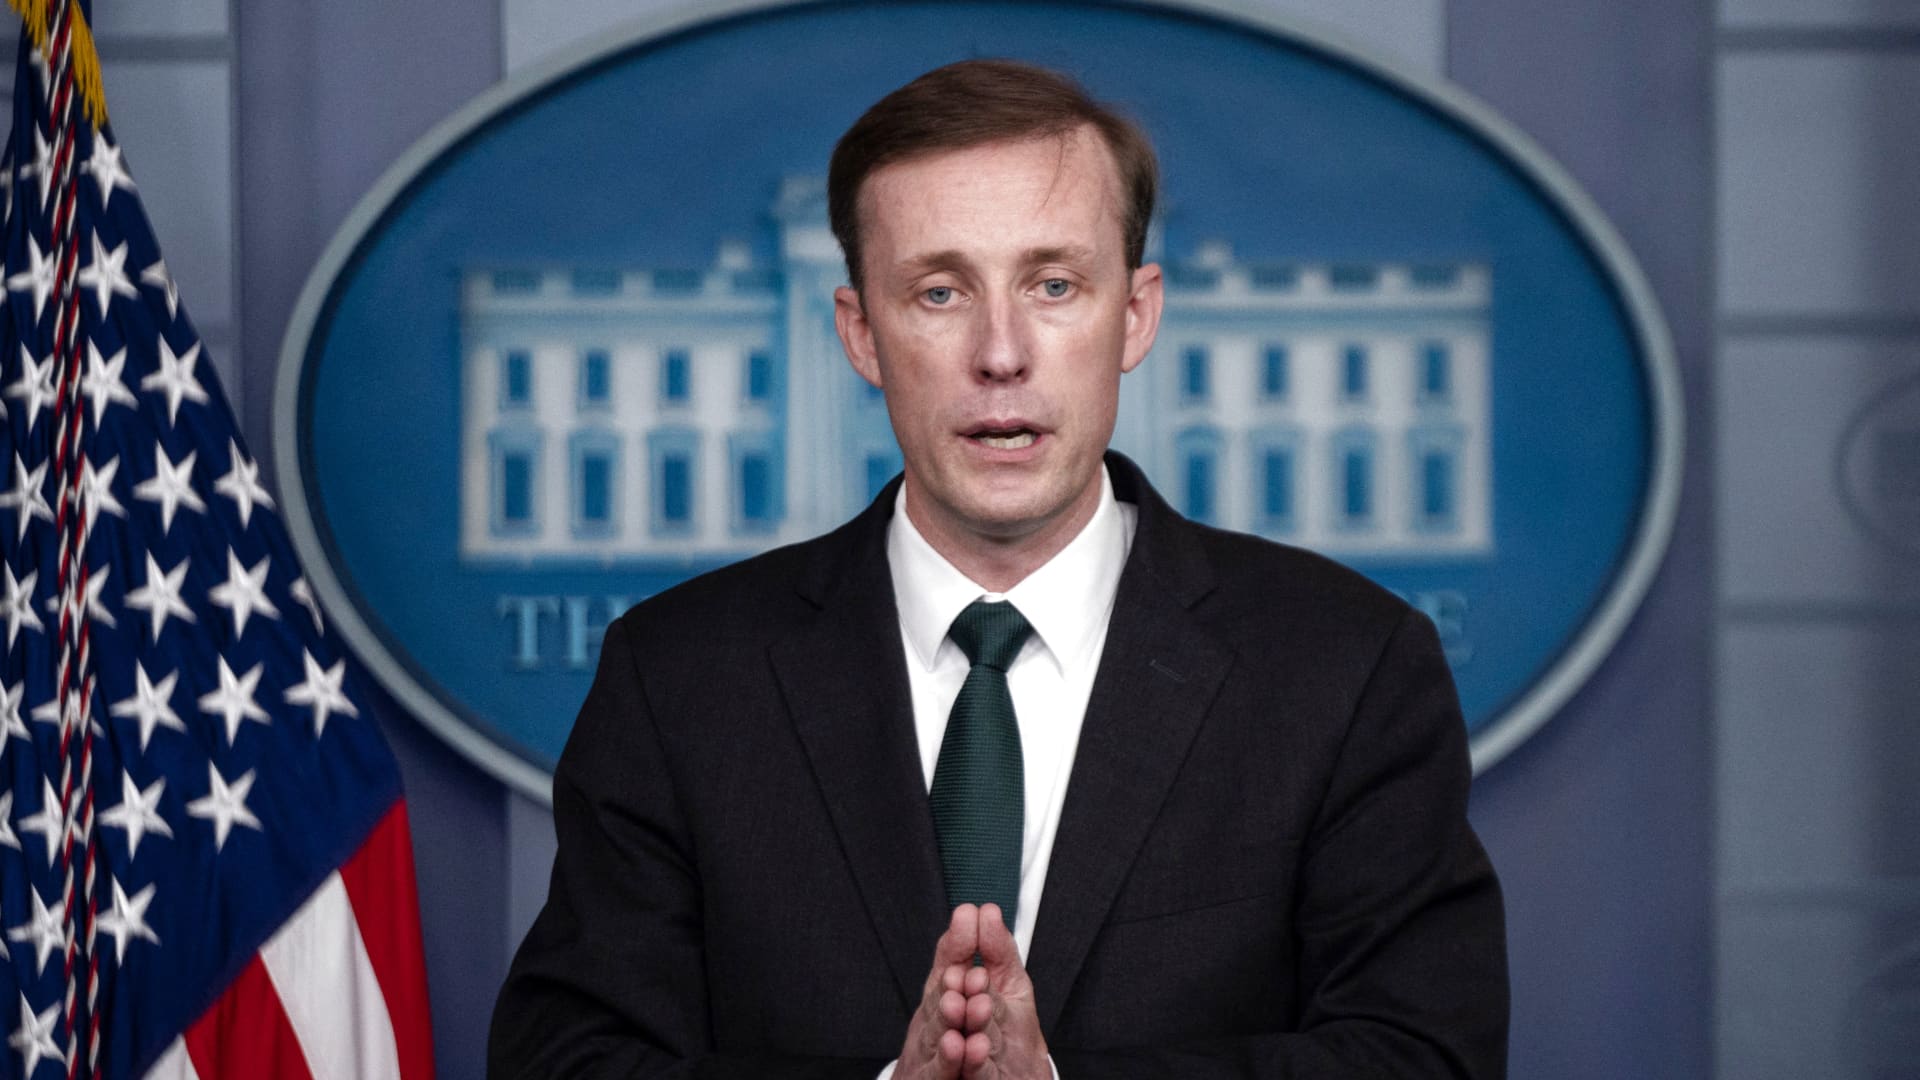 US National Security advisor Jake Sullivan speaks during the daily press briefing on the situation in Afghanistan at the White House in Washington, DC on August 17, 2021.